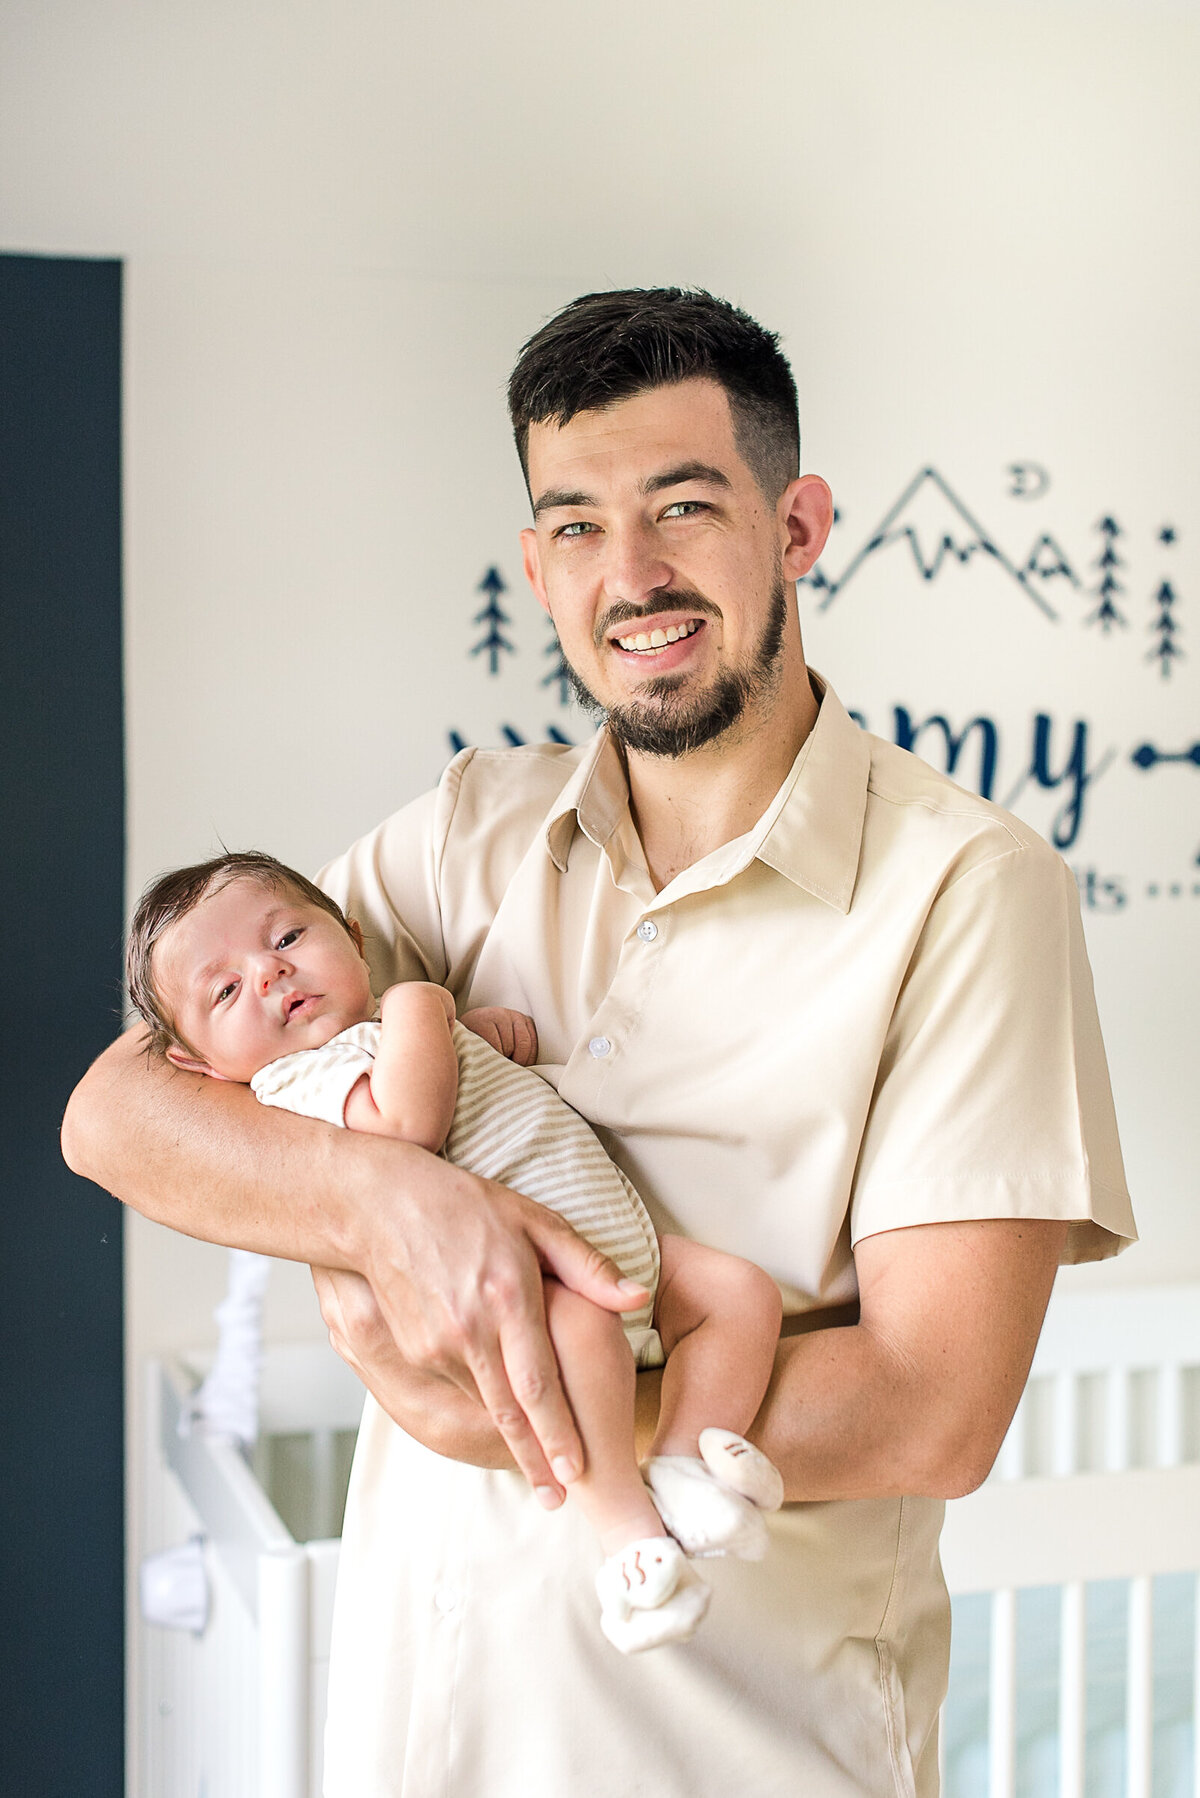 dad holding baby boy in neutral outfits in nursery